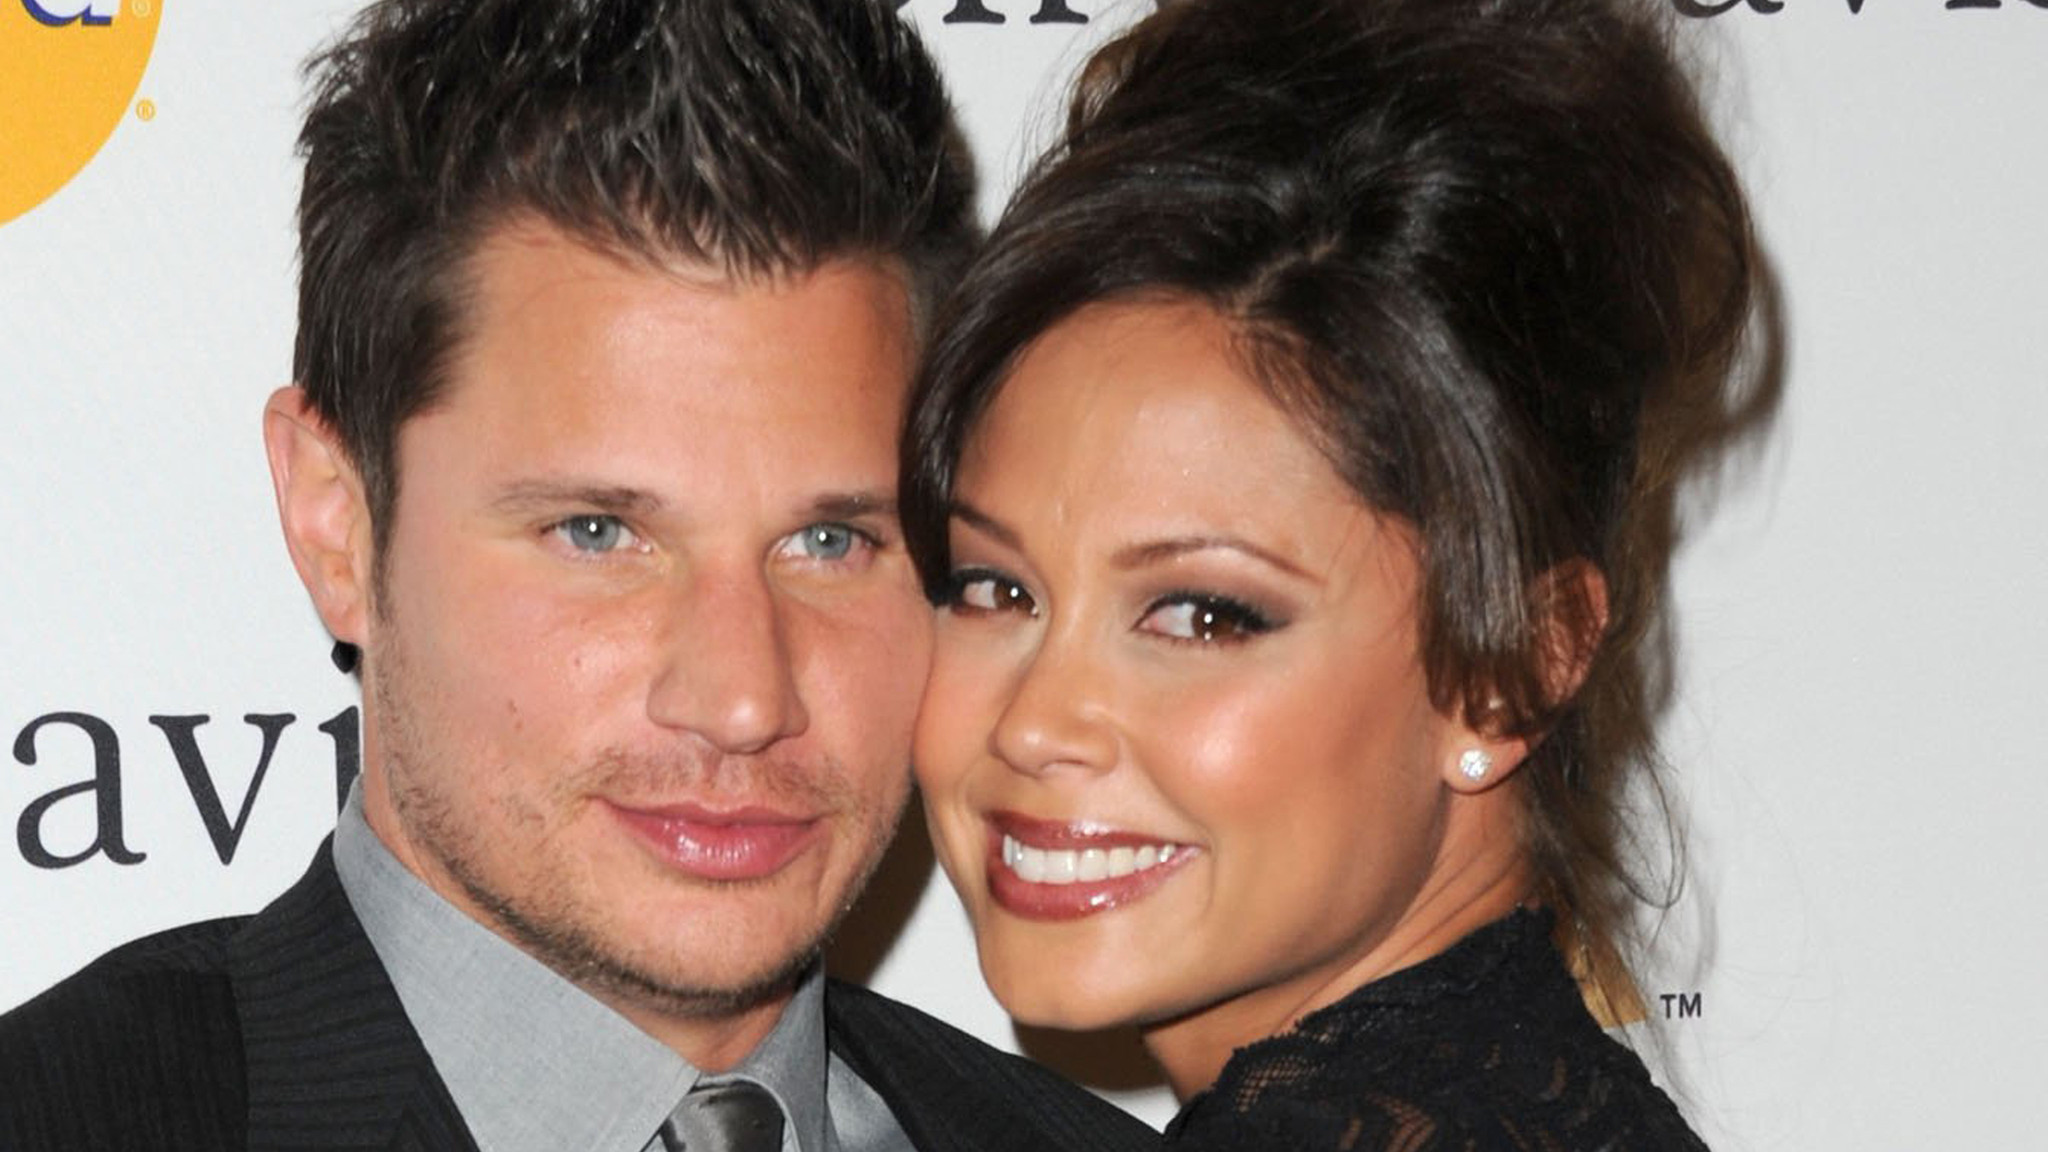 Nick Lachey, Vanessa Lachey welcome a baby daughter, their second child.